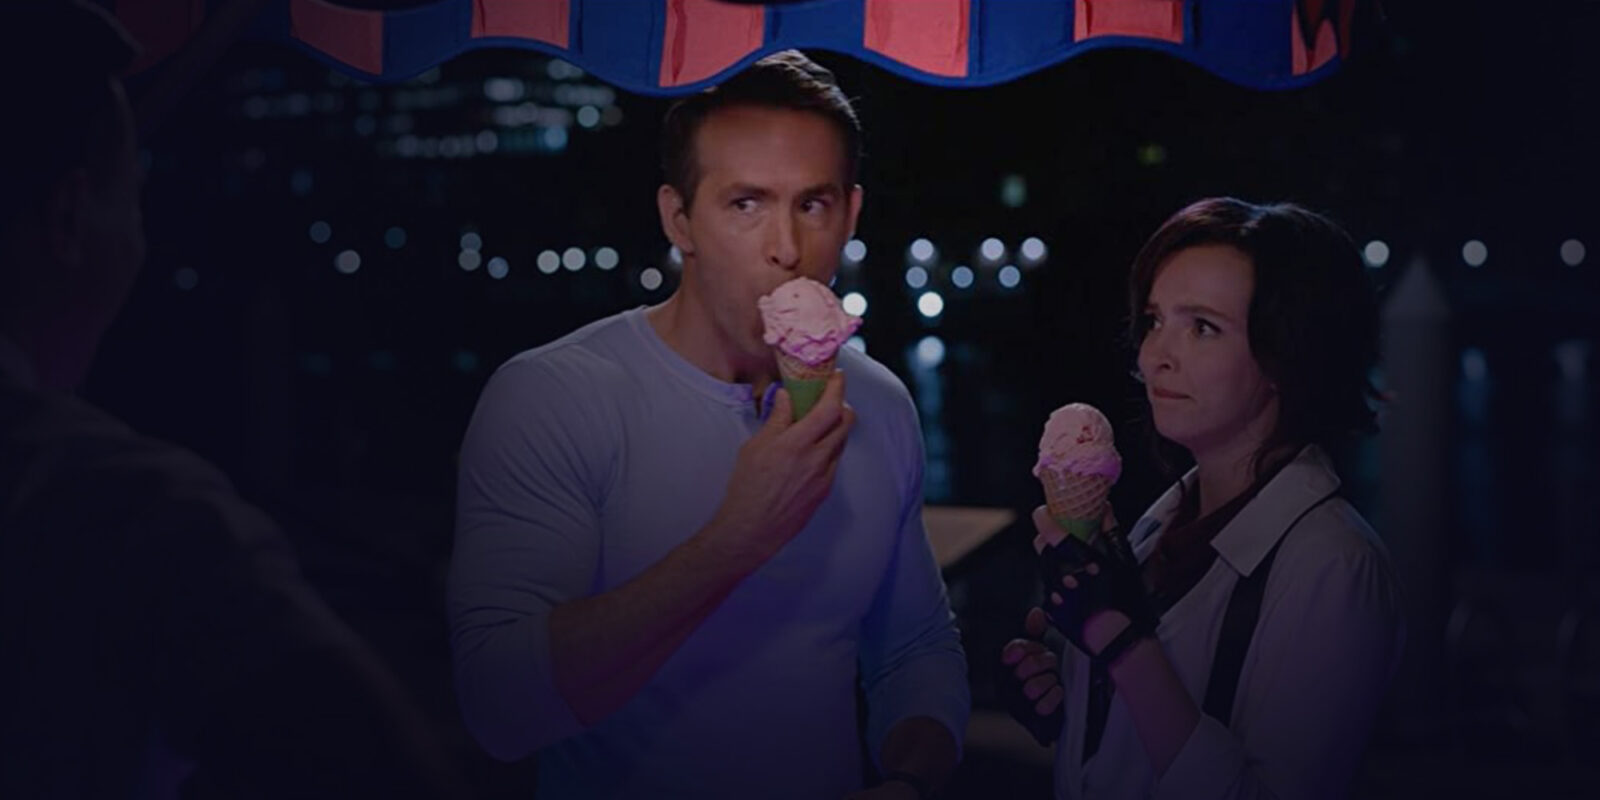 Medium shot of man and woman eating their cone ice cream